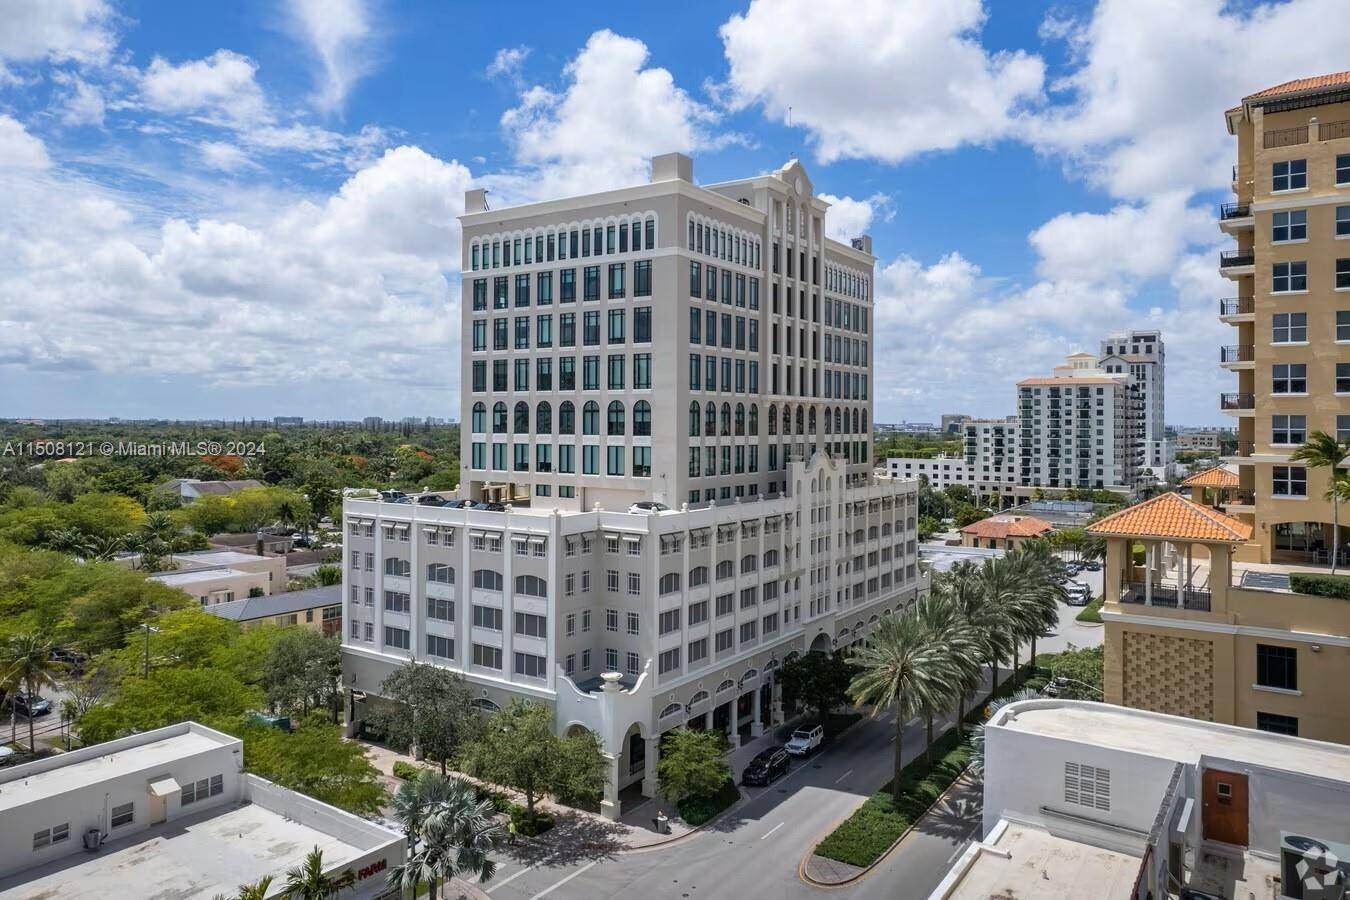 1357 Sq. Ft. of retail space located on Ponce De Leon Blvd in 1600 Ponce building.